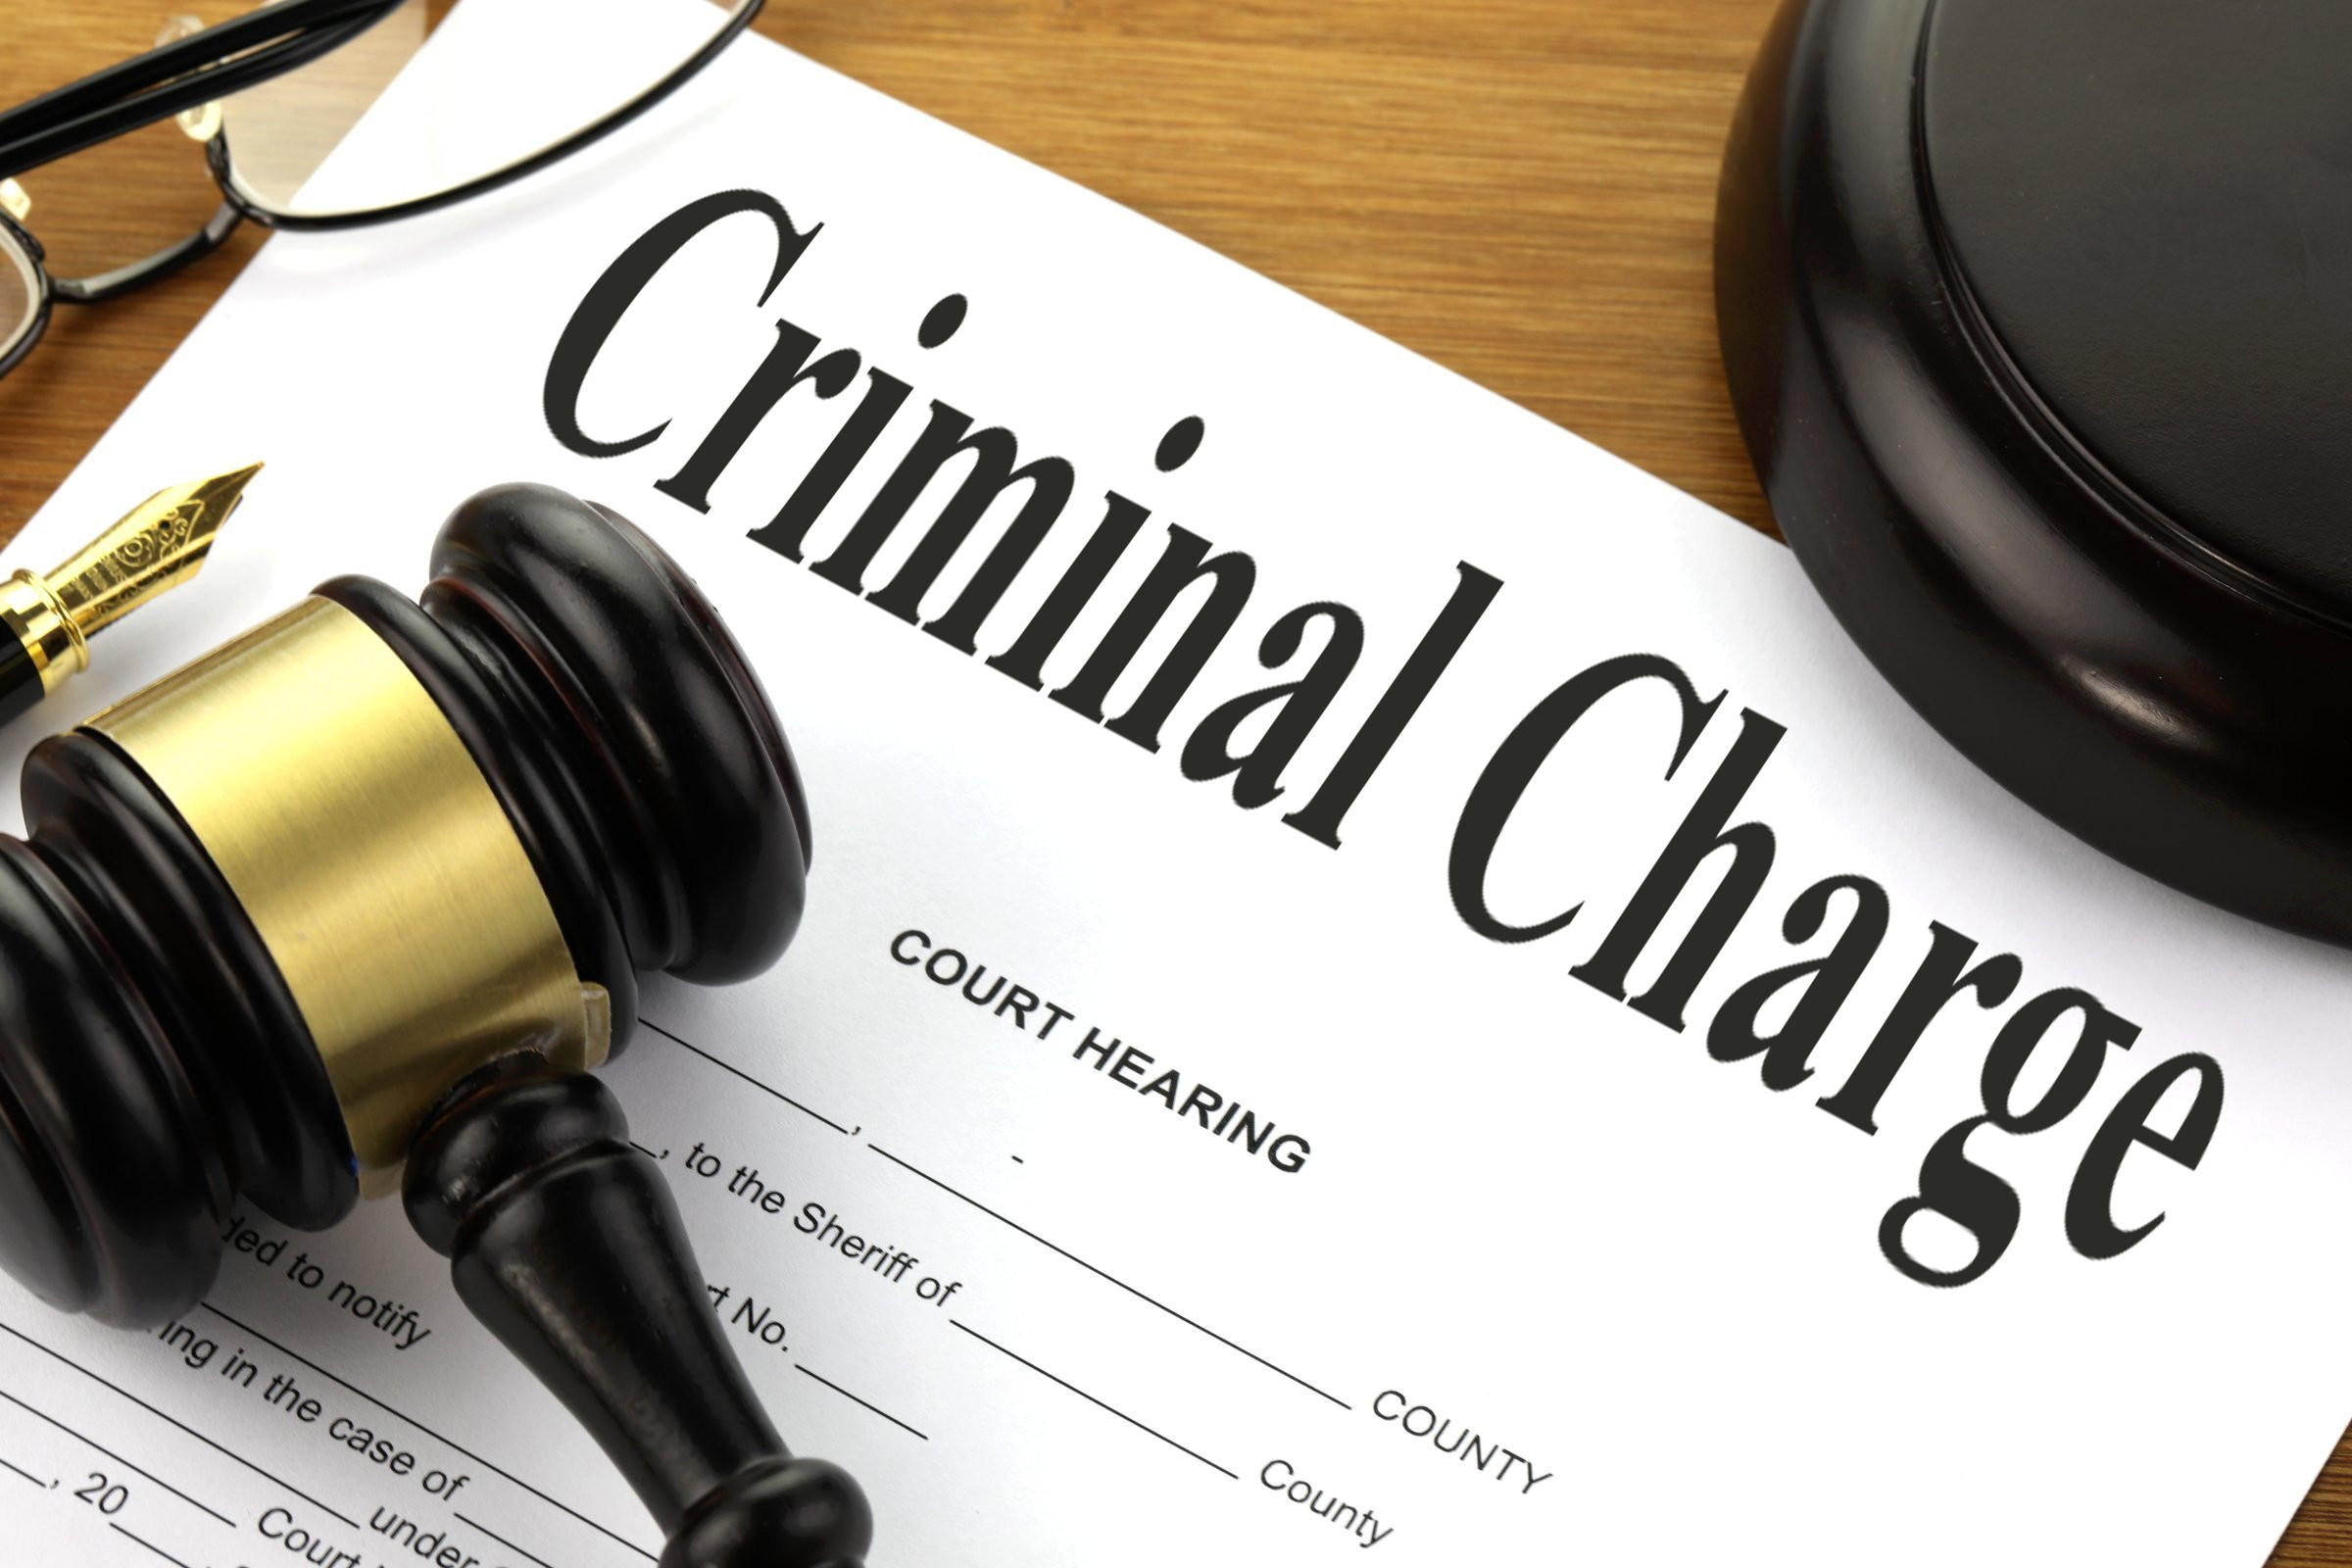 Free Of Charge Creative Commons Criminal Charge Image Legal